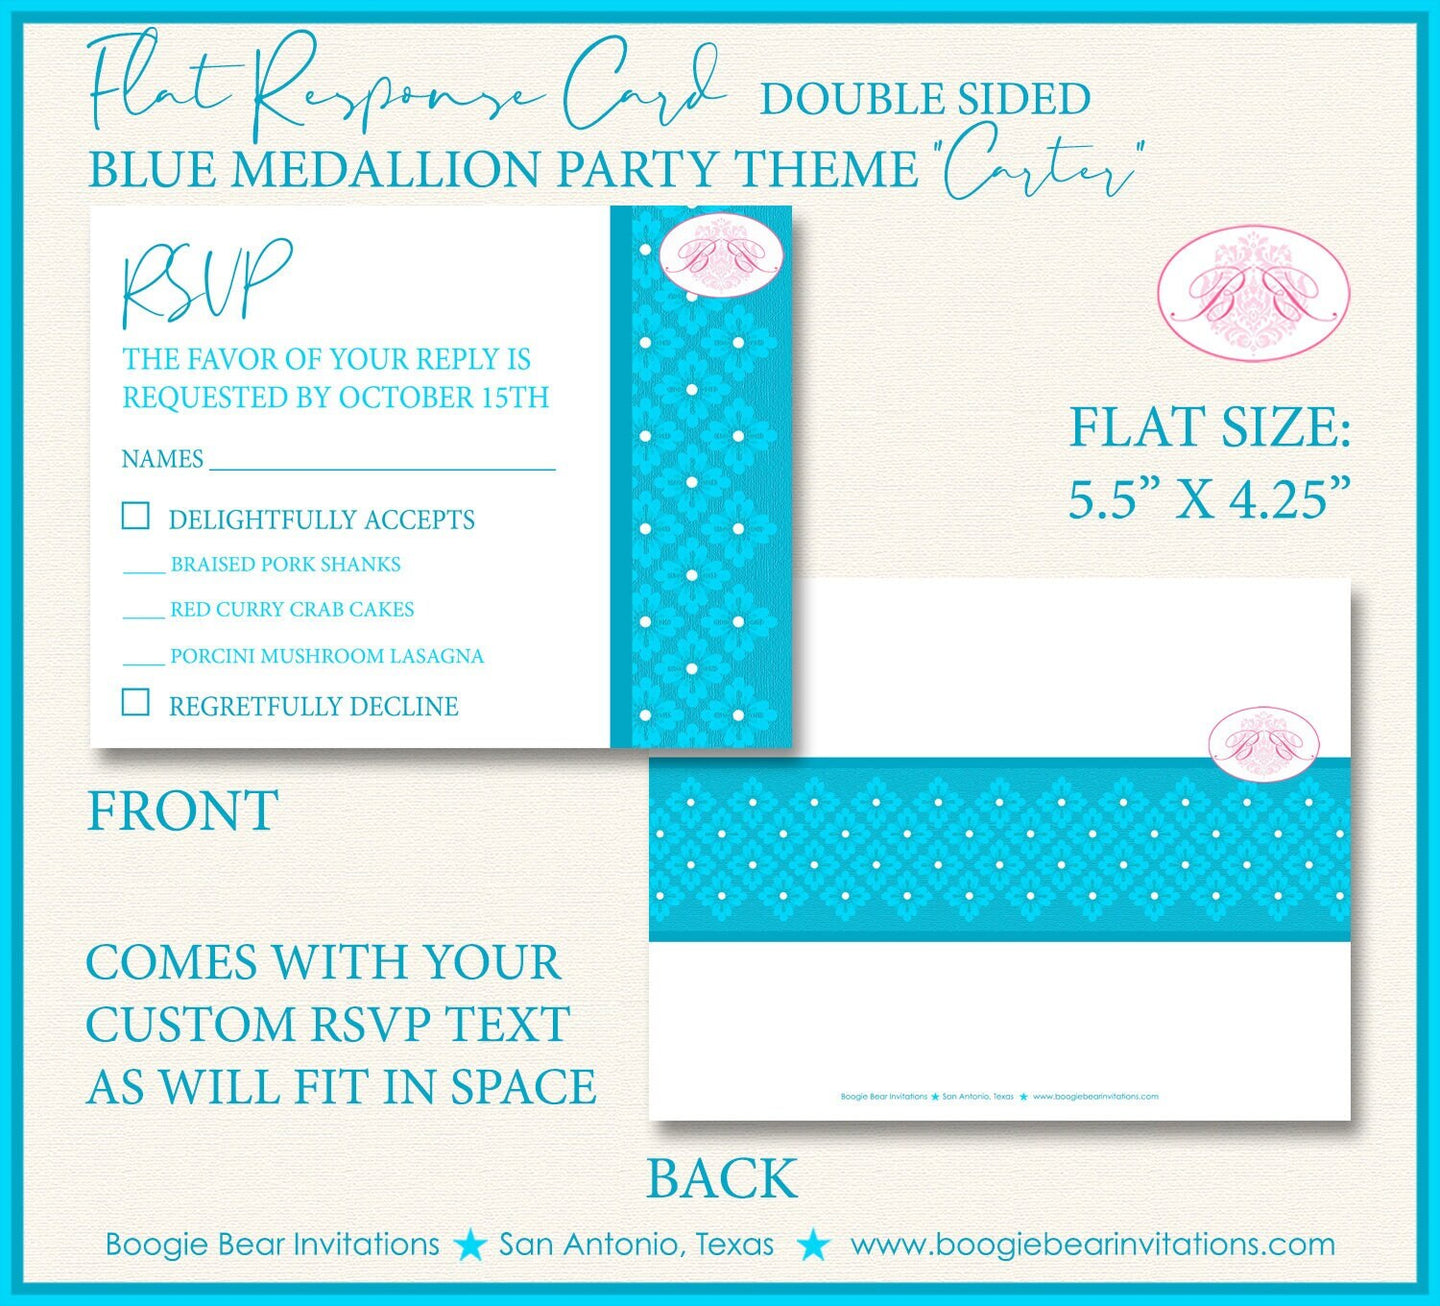 Blue Medallion RSVP Card Birthday Birthday Party Flower Damask Victorian Response Reply Guest Boogie Bear Invitations Carter Theme Printed